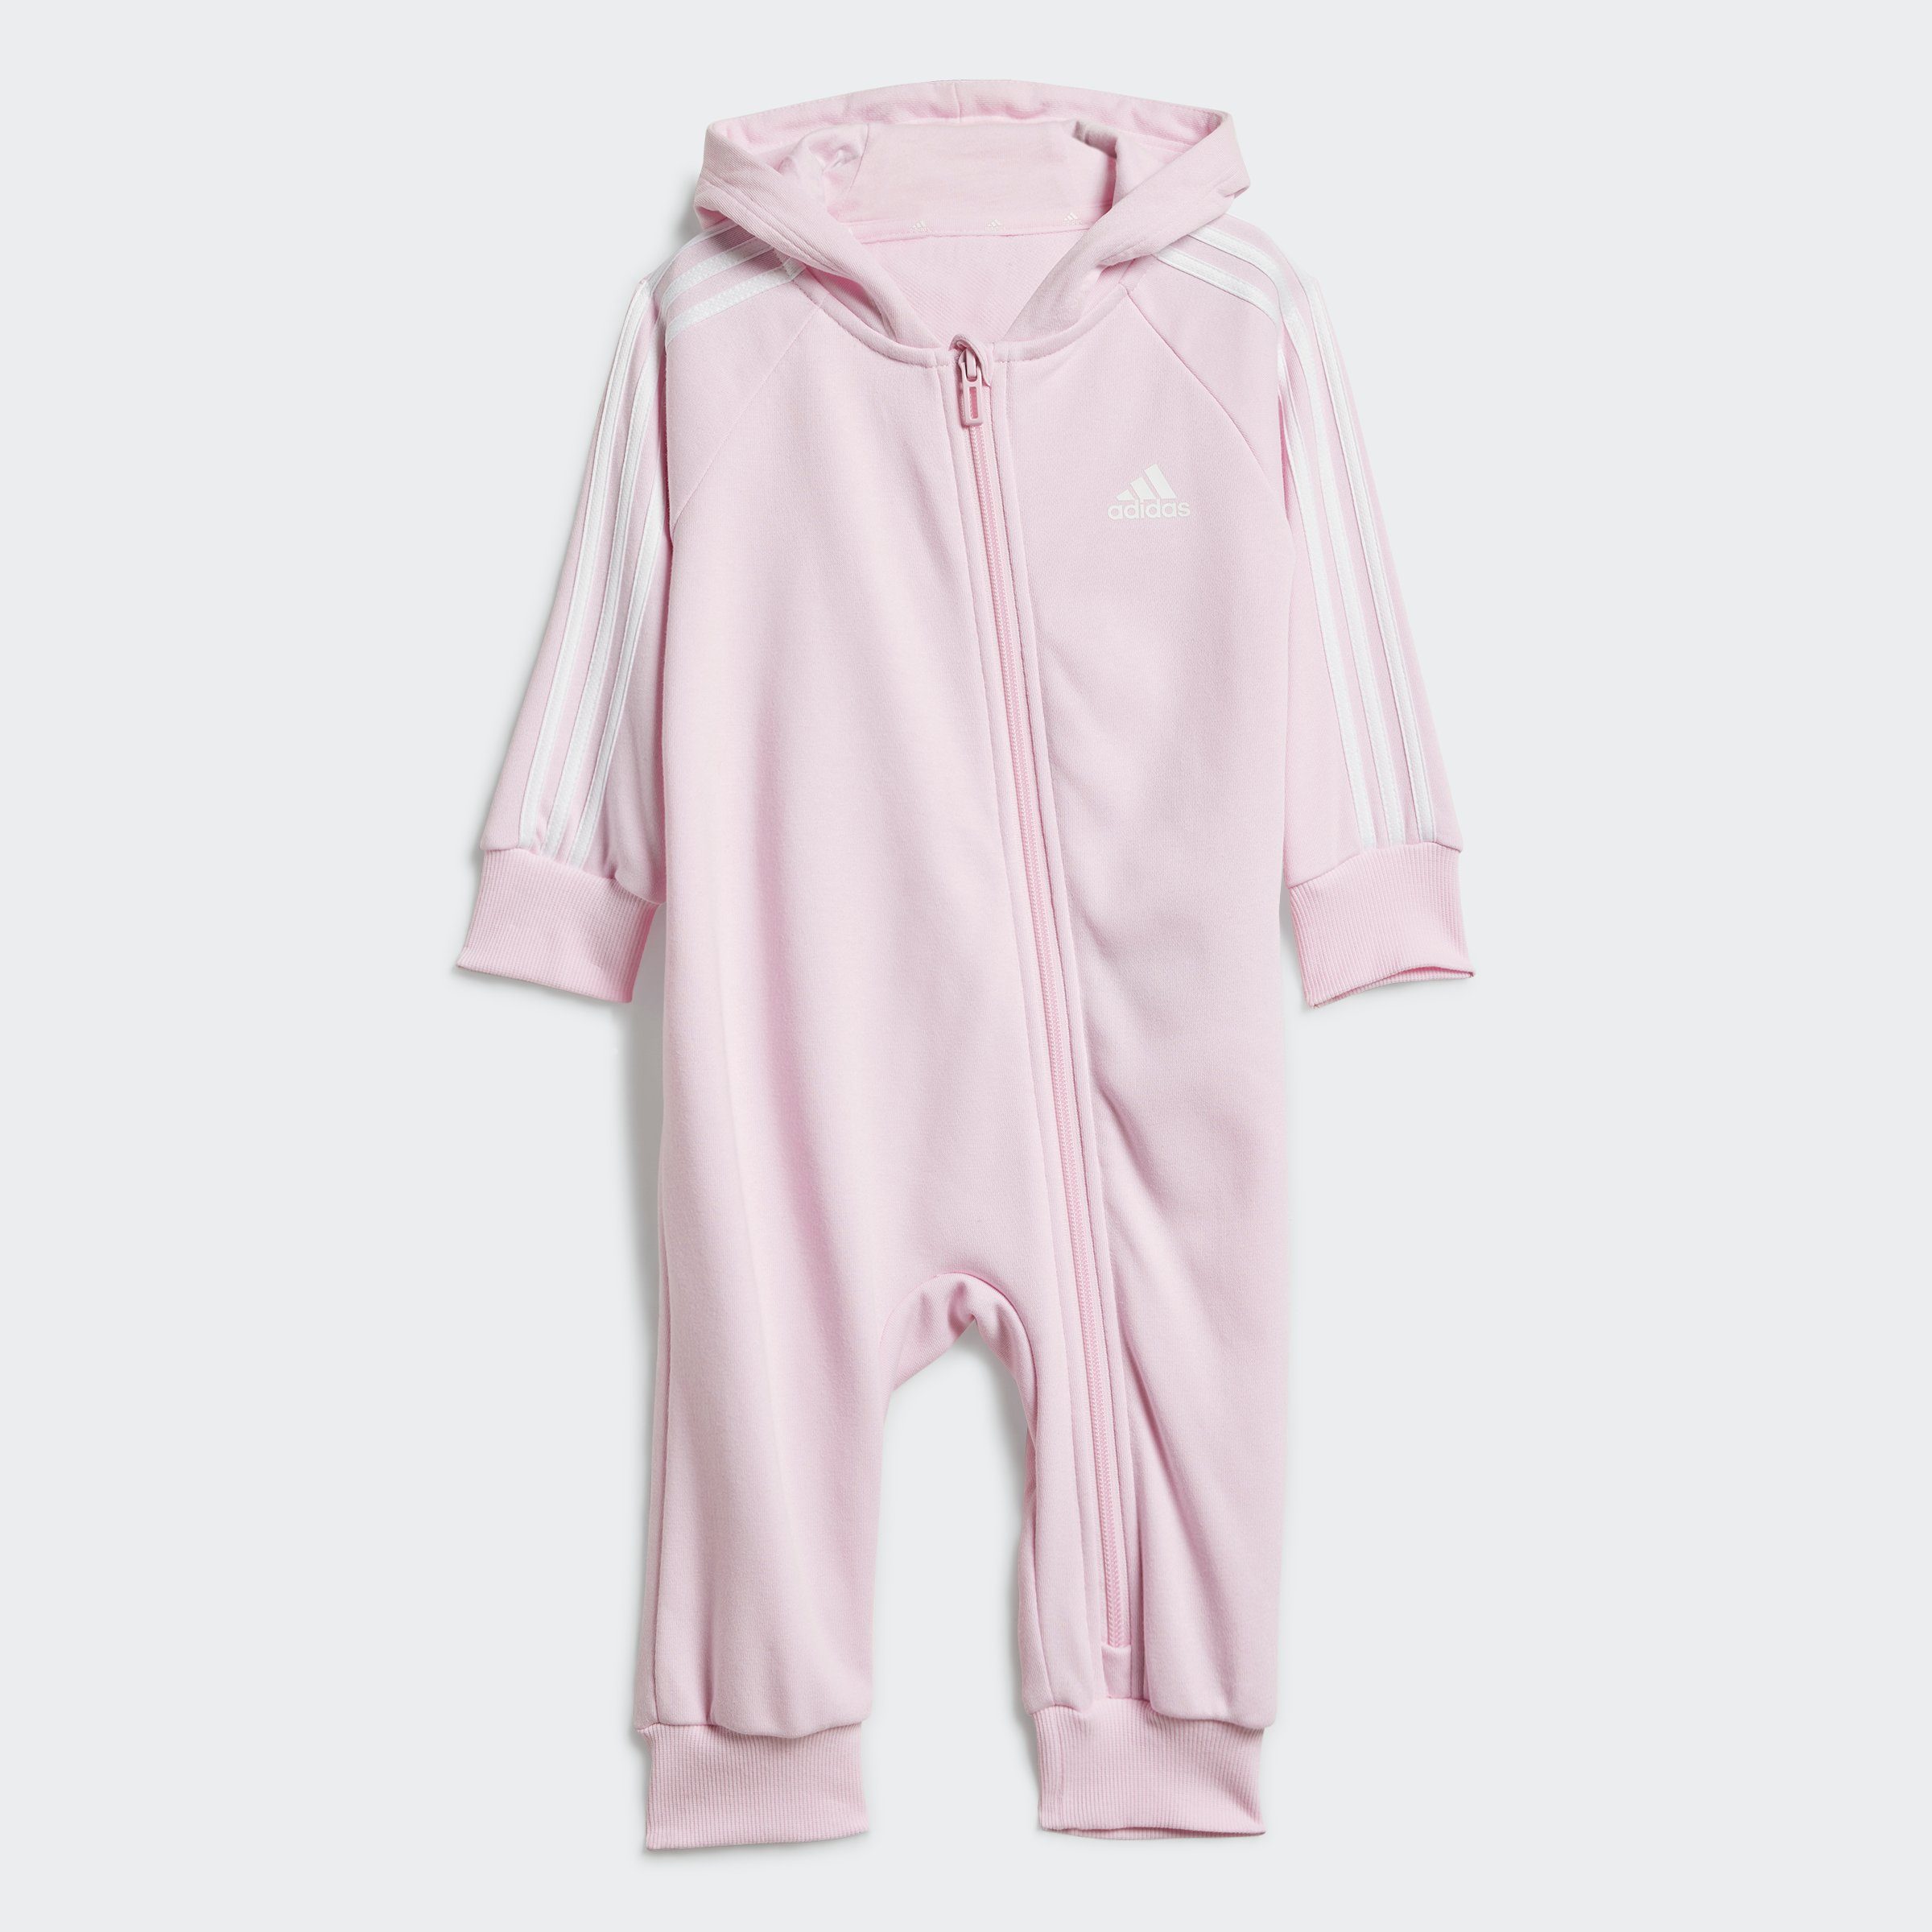 / Pink Clear White Overall ONESIE Sportswear 3S adidas FT I